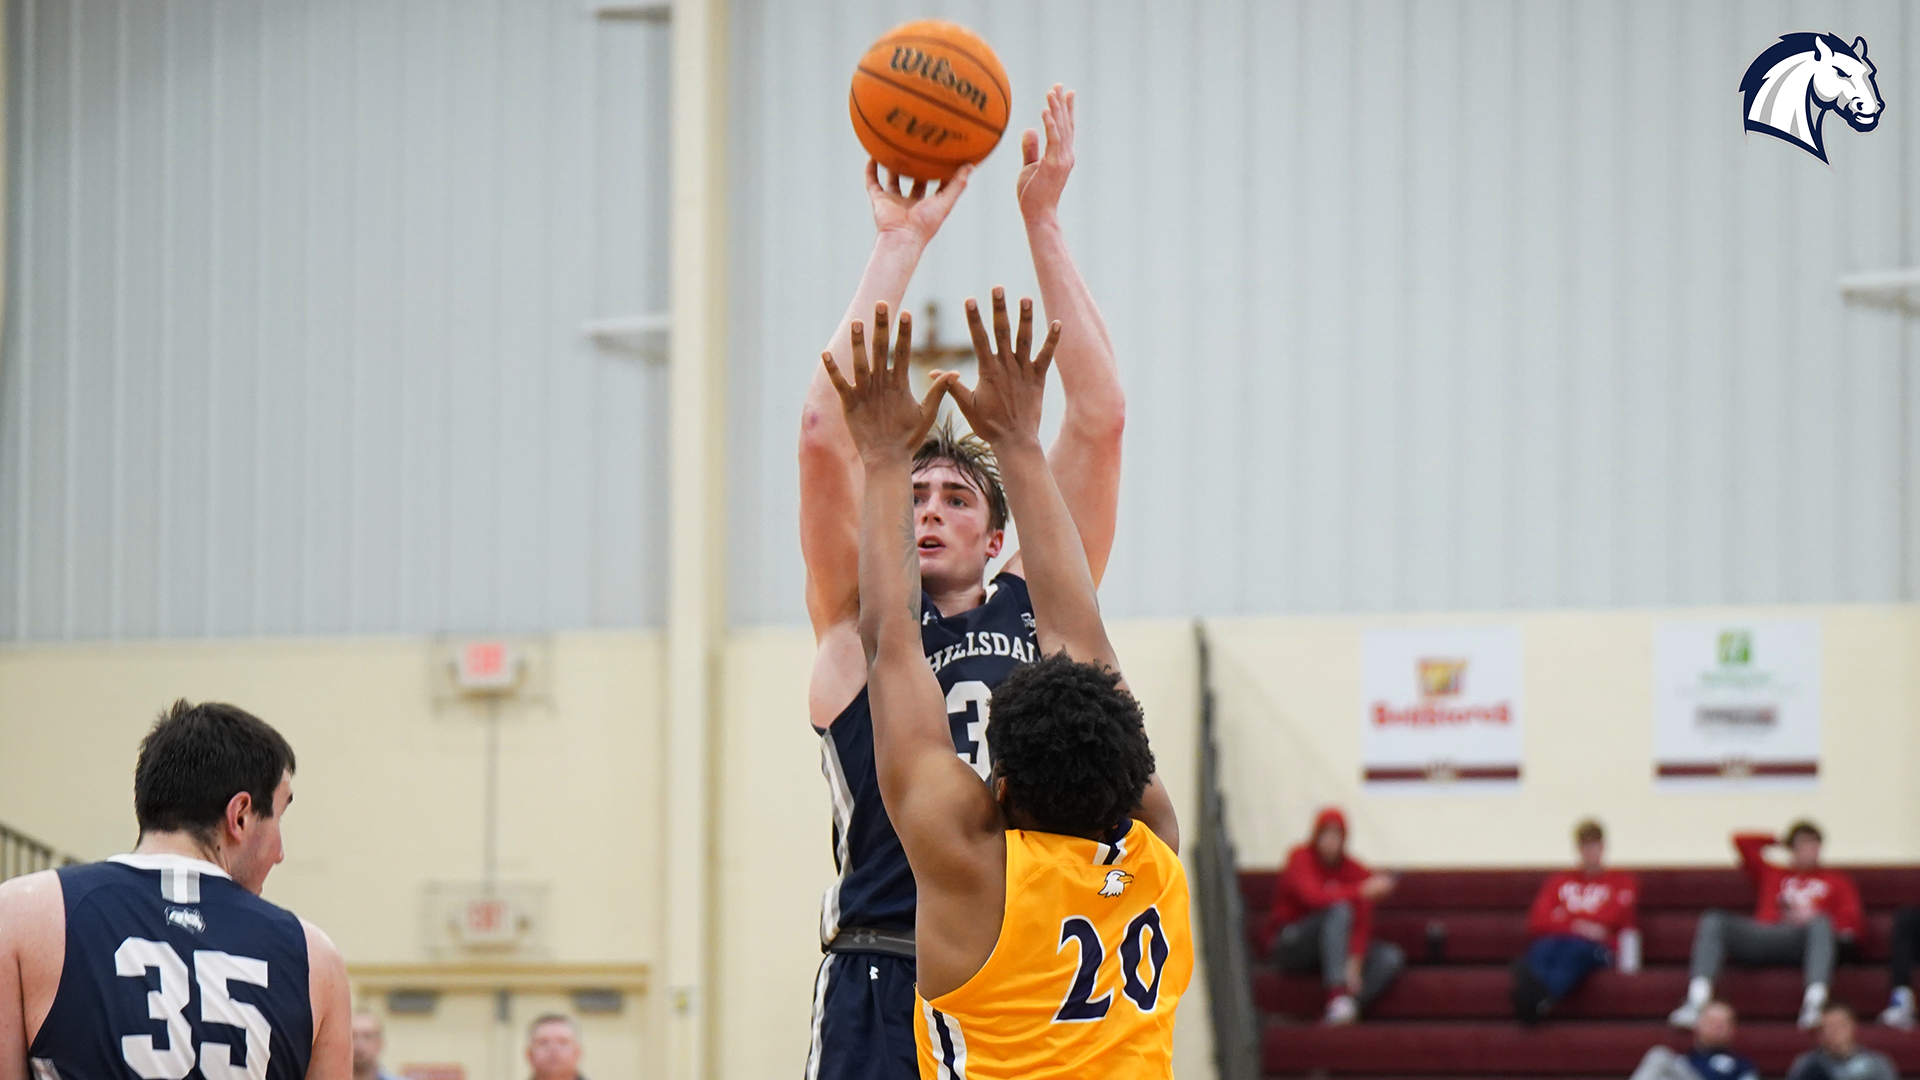 Late comeback not enough as Chargers fall to Ashland in G-MAC semis, 76-69